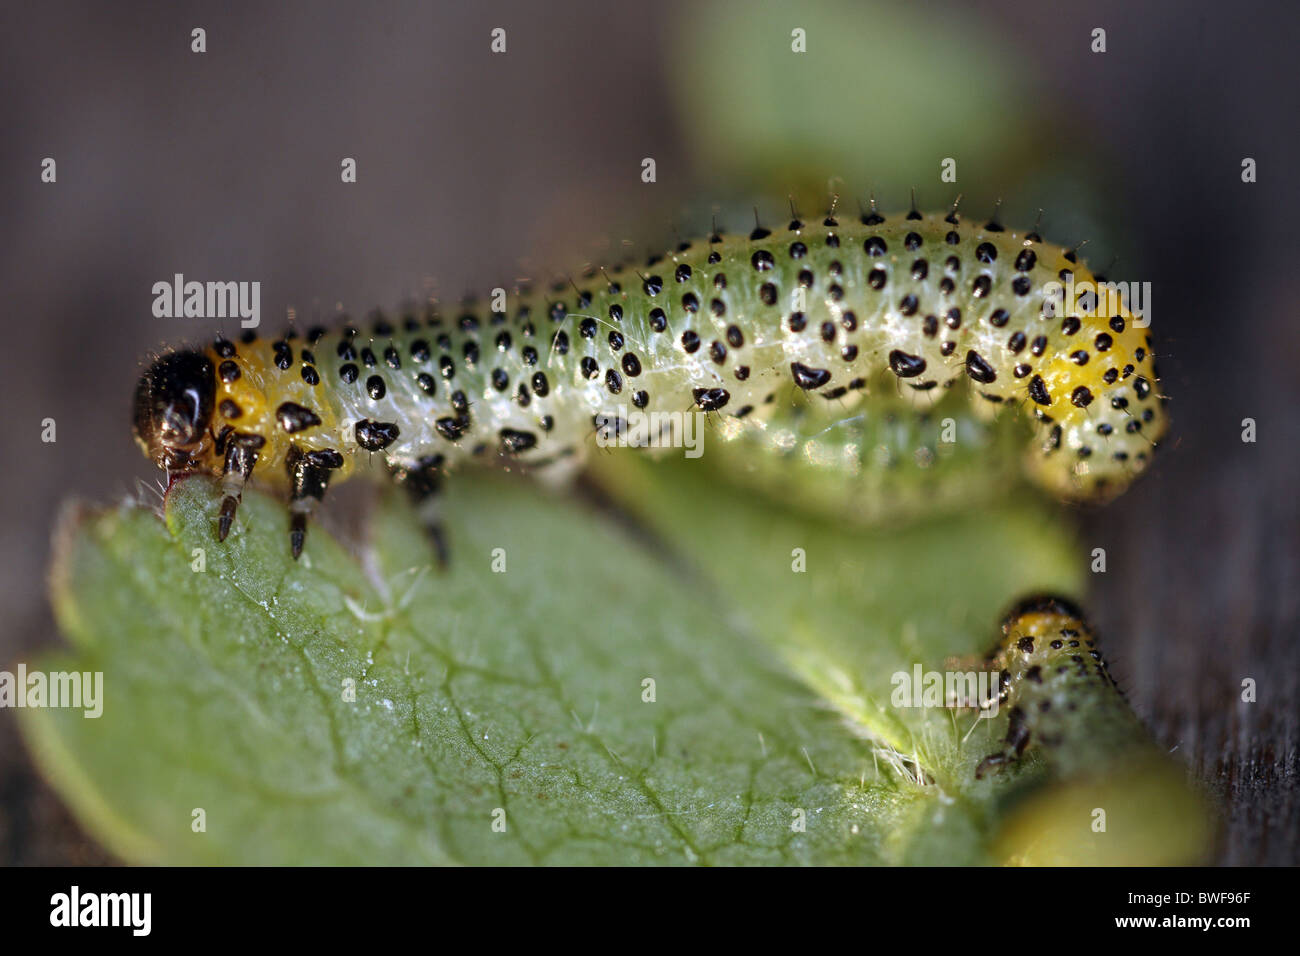 A caterpillar chewing on a leaf Stock Photo